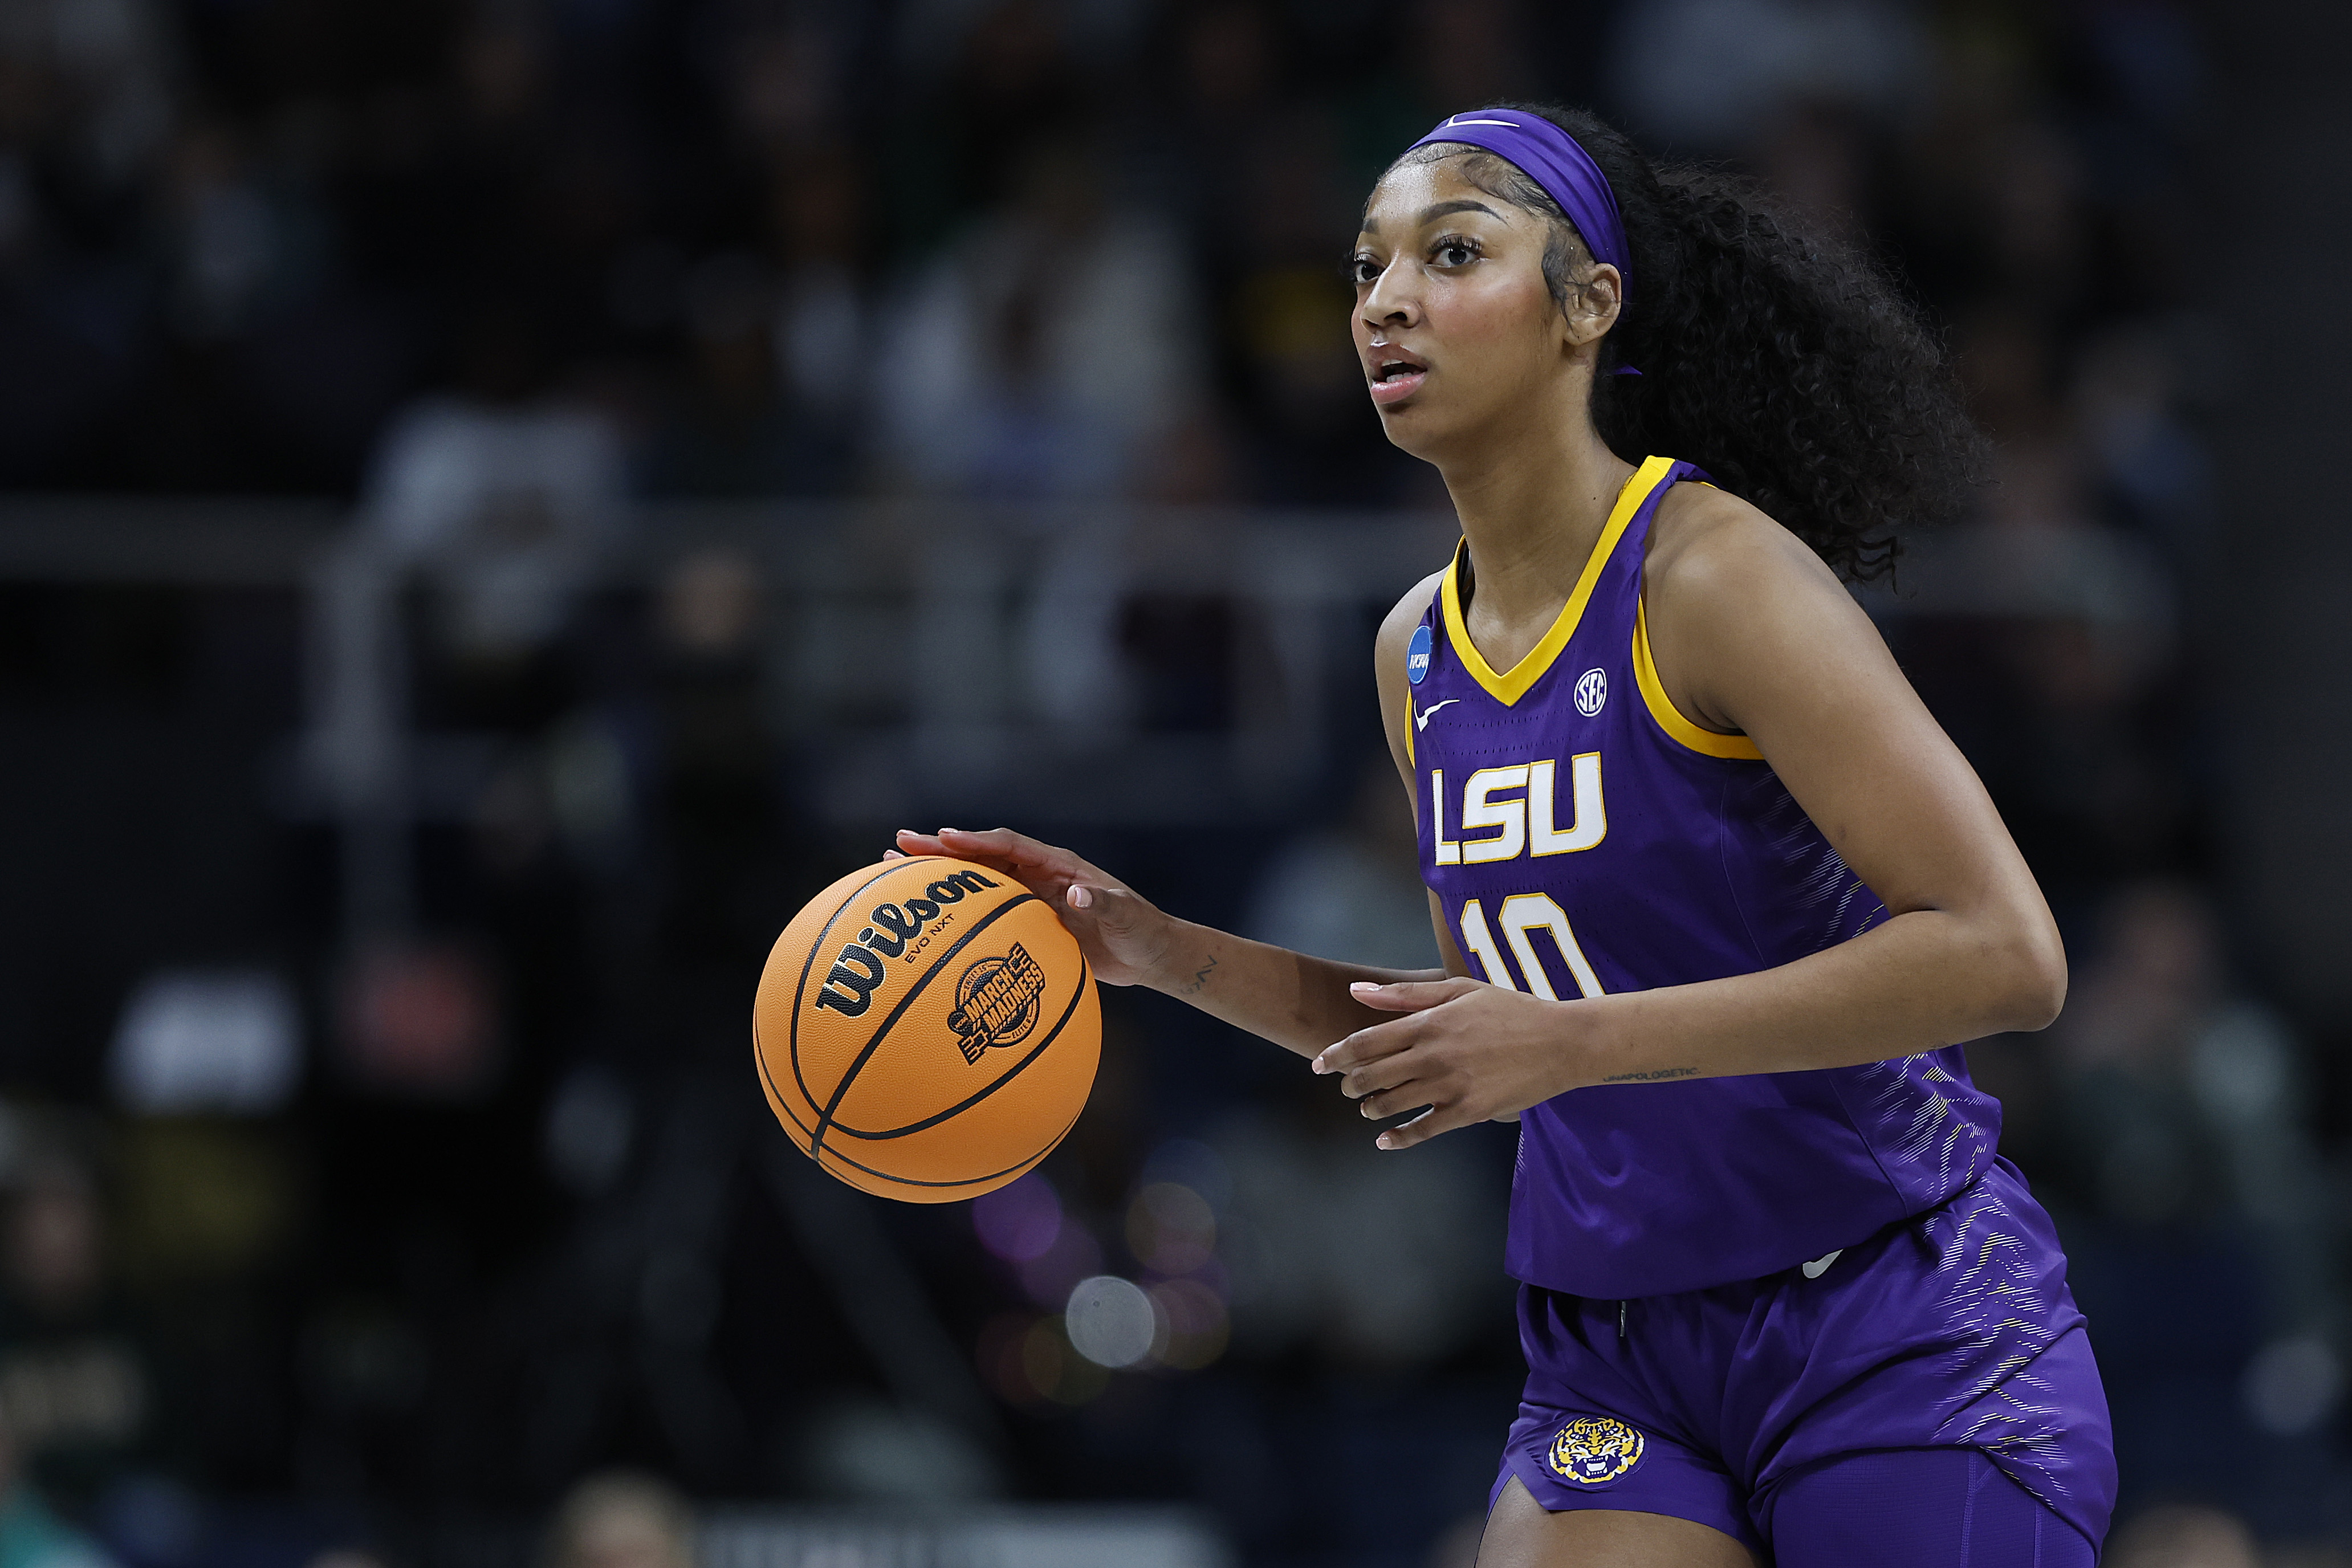 LSU star Angel Reese declares for WNBA draft via Vogue photo shoot, says ‘I didn’t want to be basic’